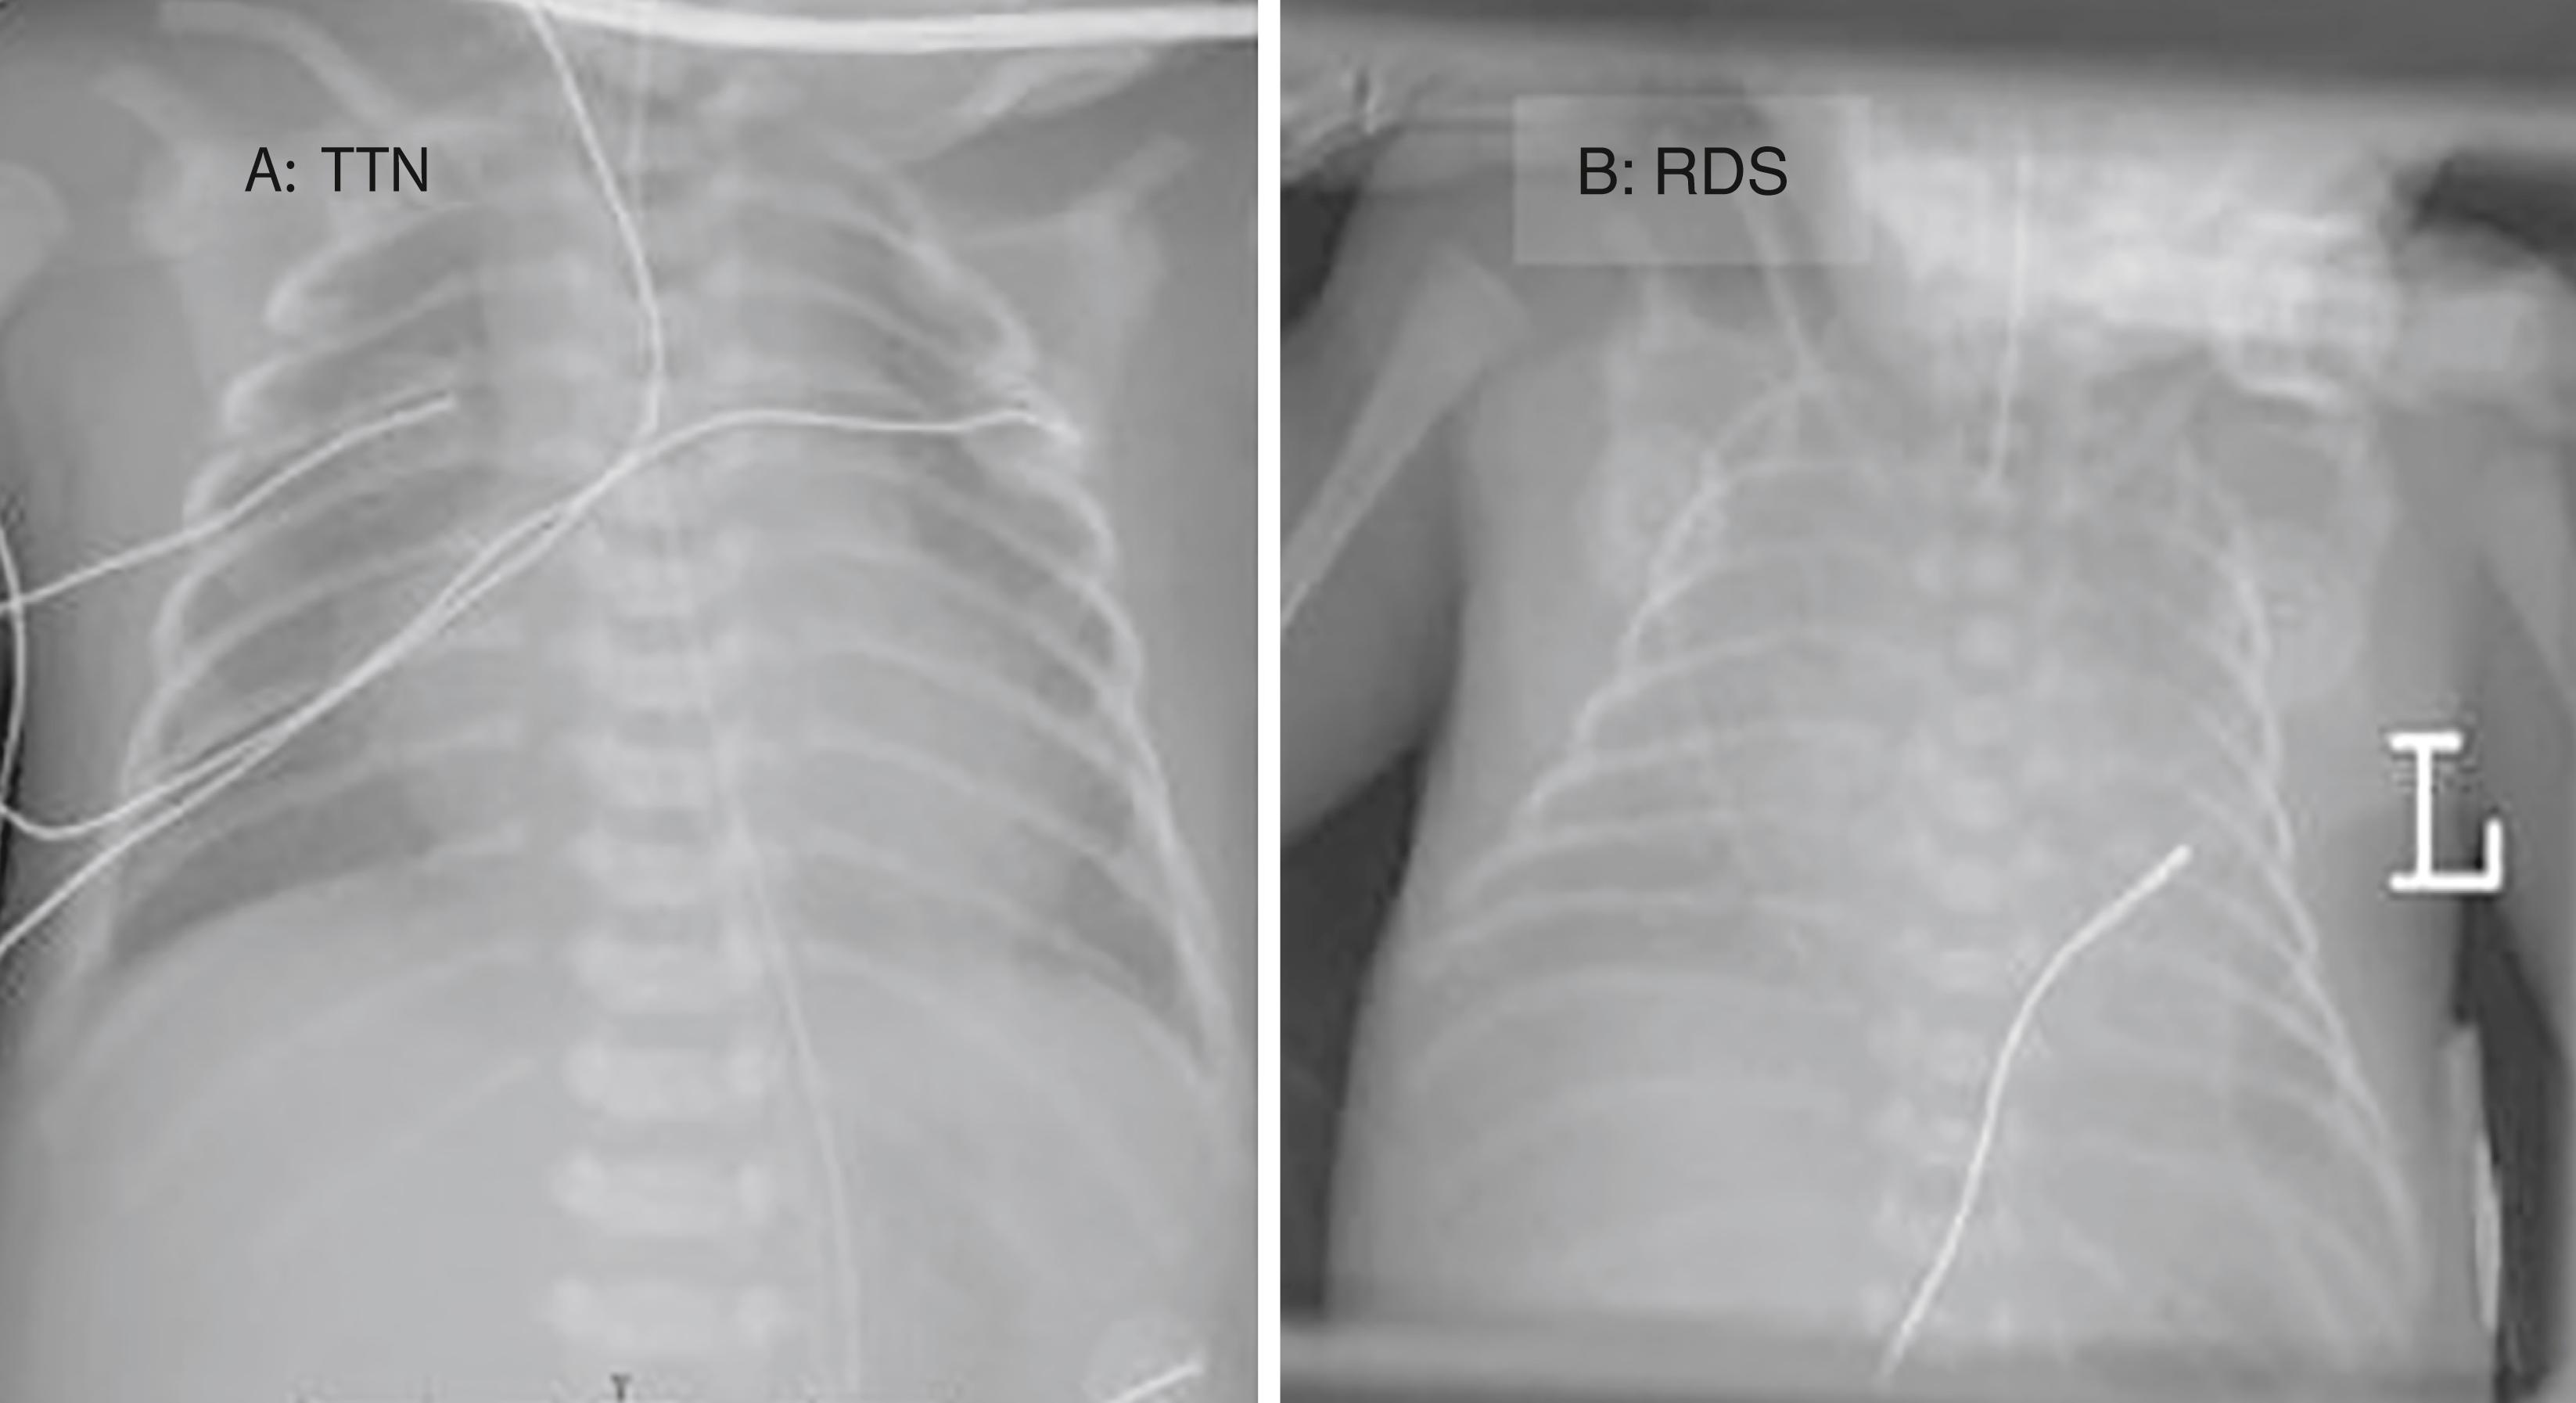 Figure 73.2, Chest x-ray appearance of transient tachypnea of the newborn (TTN) (A) and respiratory distress syndrome (RDS) (B). The radiographic characteristics of TTN include perihilar densities with good aeration, bordering on hyperinflation. In contrast, neonates with RDS have diminished lung volumes on chest x-ray reflecting atelectasis associated with surfactant deficiency. Diffuse “ground glass” infiltrates along with air bronchograms make the cardiothymic silhouette indistinct.